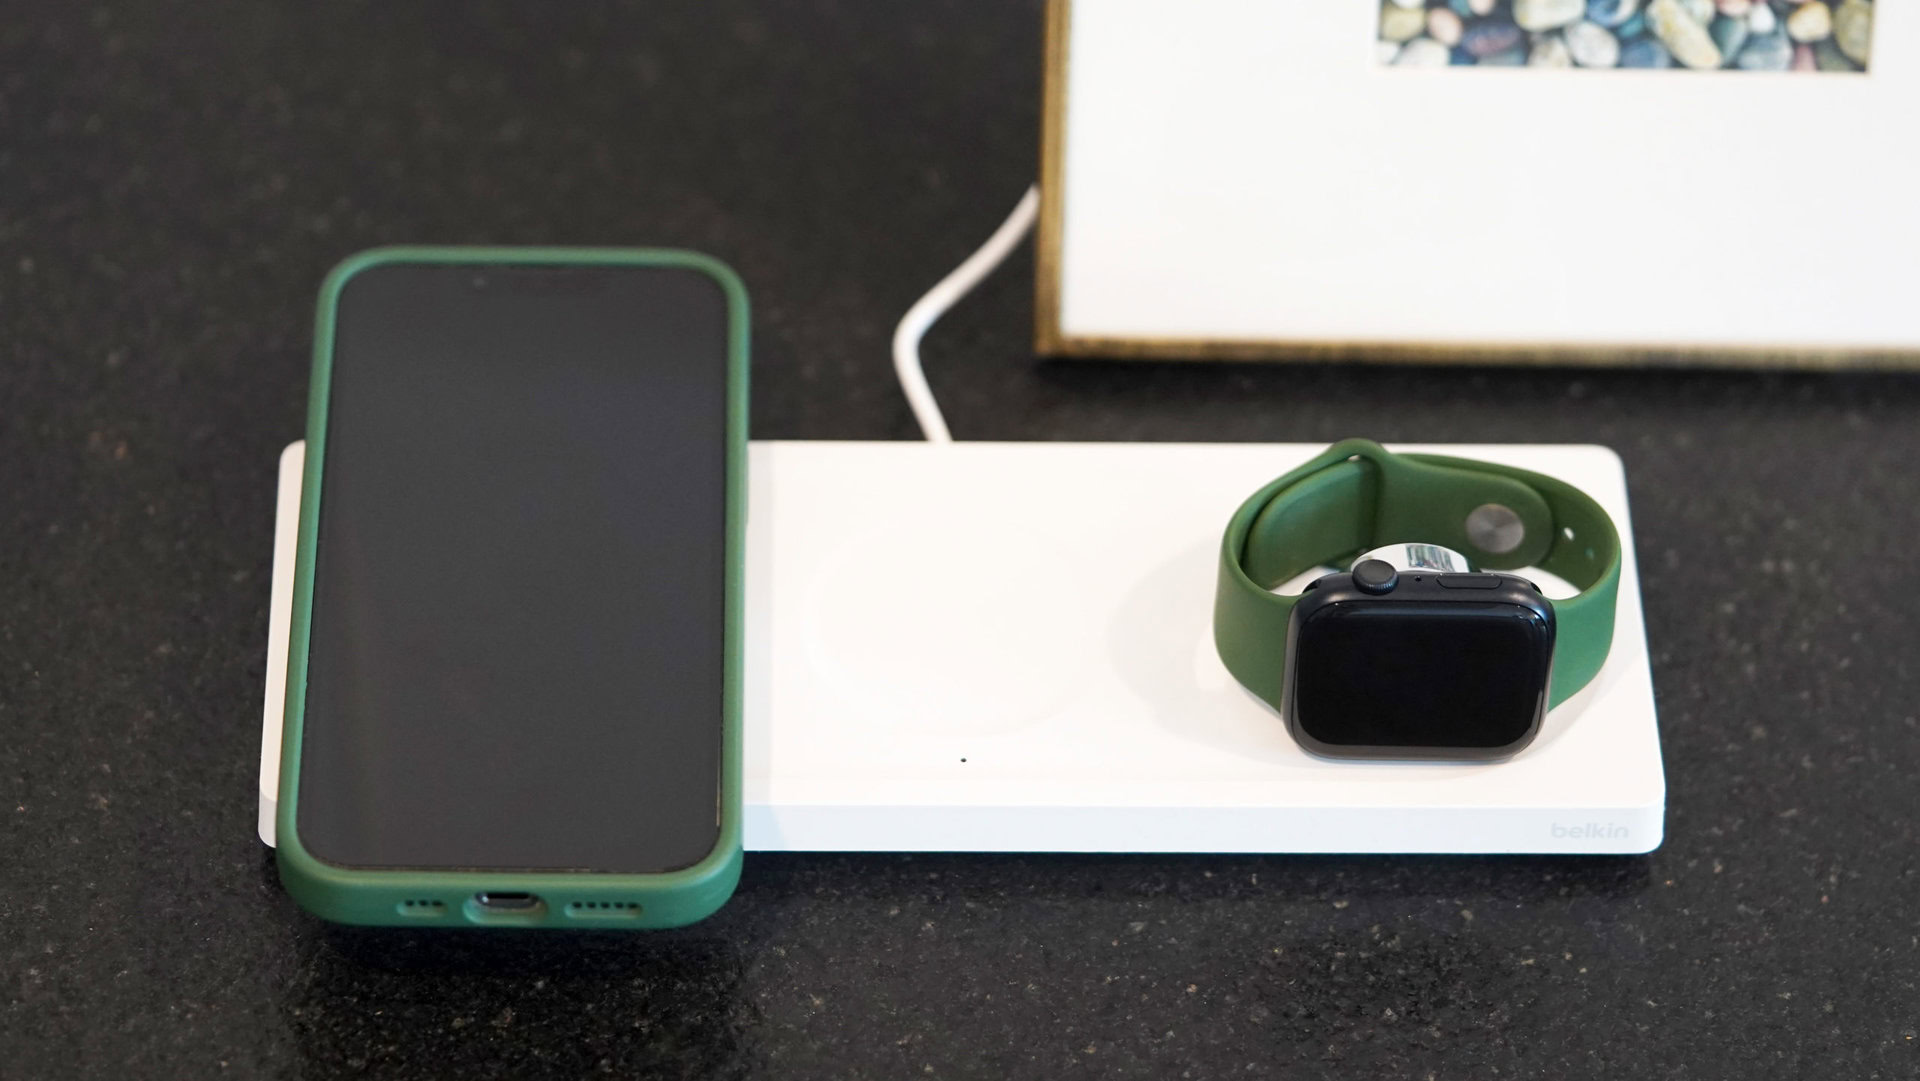 A Belkin BoostCharge Pro 3 in 1 Wireless Charging Pad charges an iPhone and an Apple Watch.